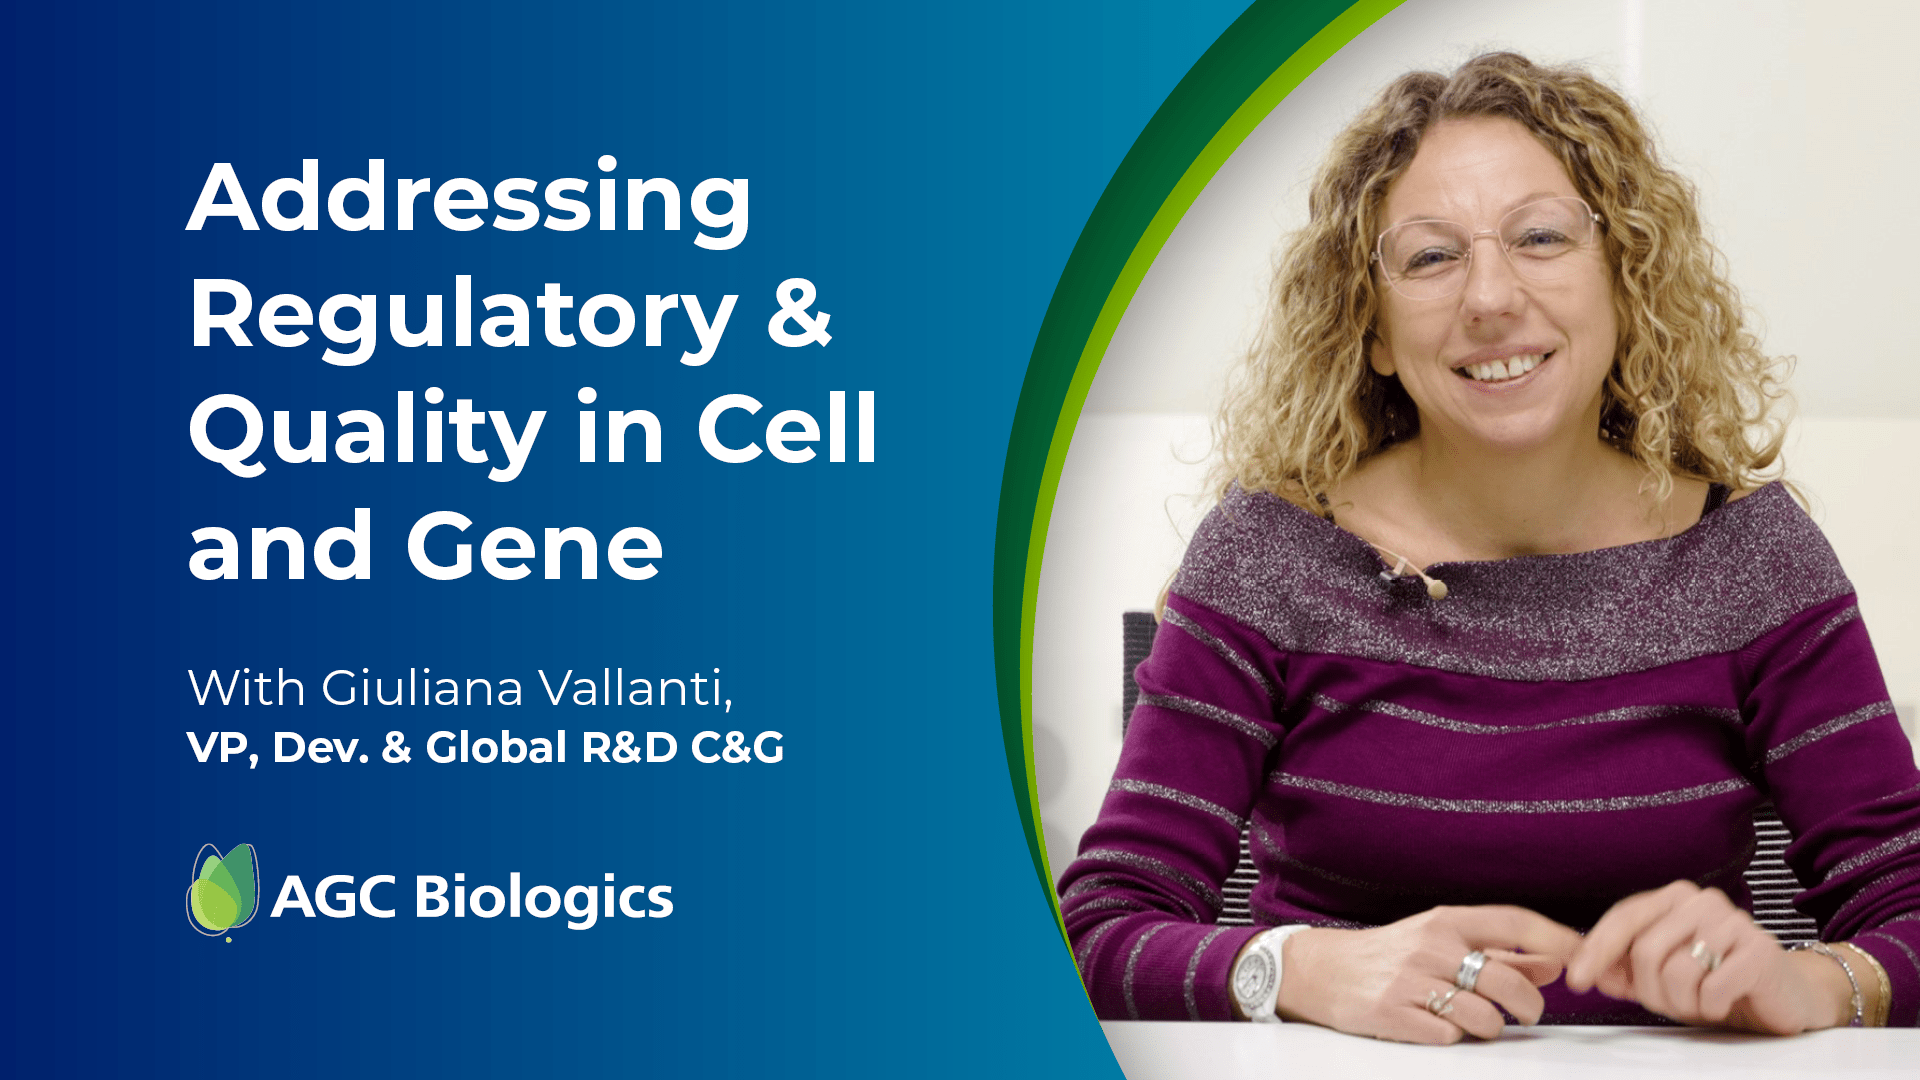 Addressing Regulatory & Quality in Cell and Gene with Giuliana Vallanti